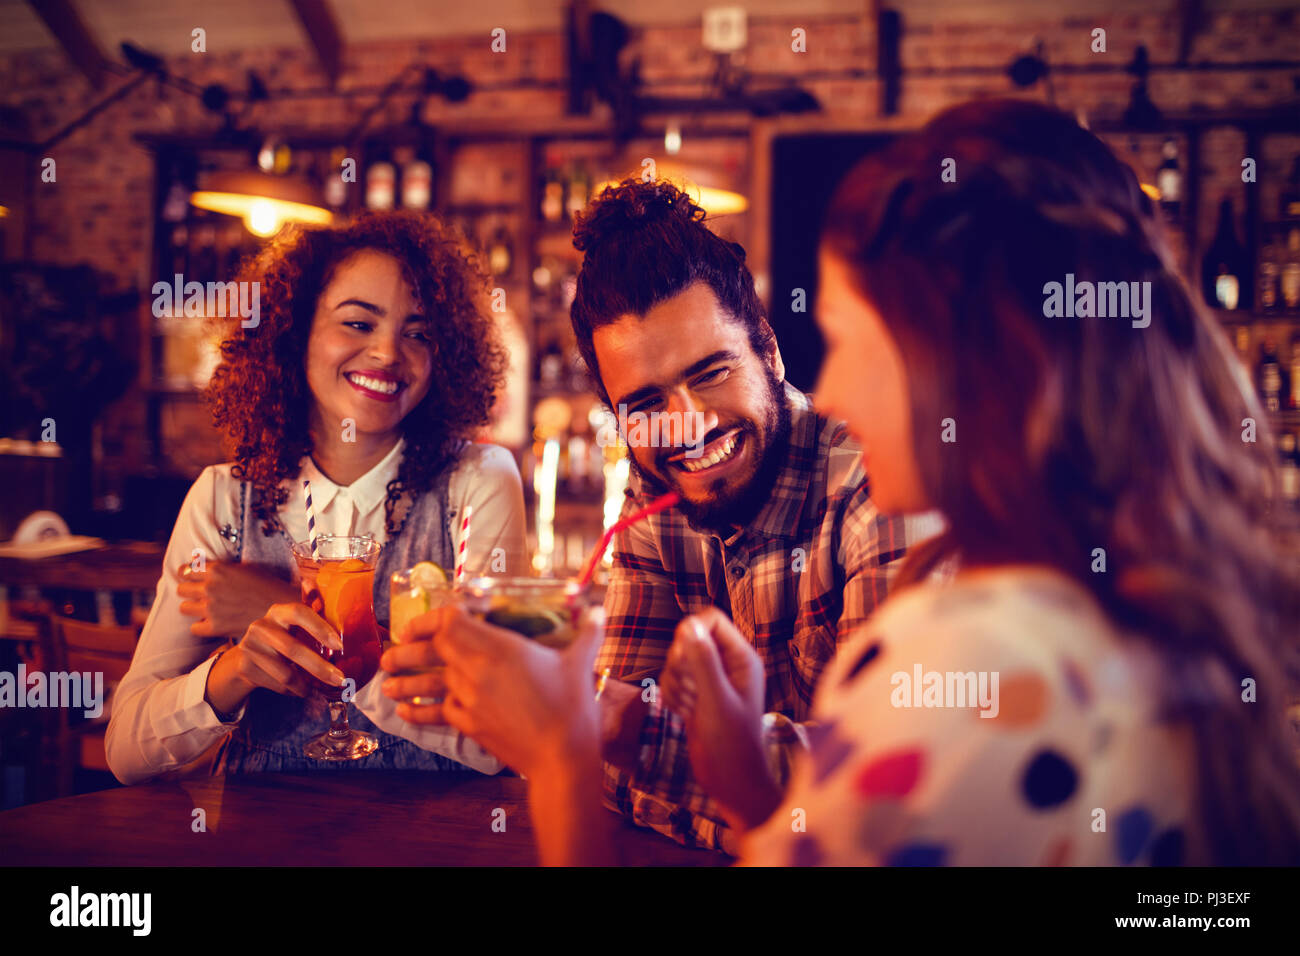 Young friends interacting with each other having drinks Stock Photo